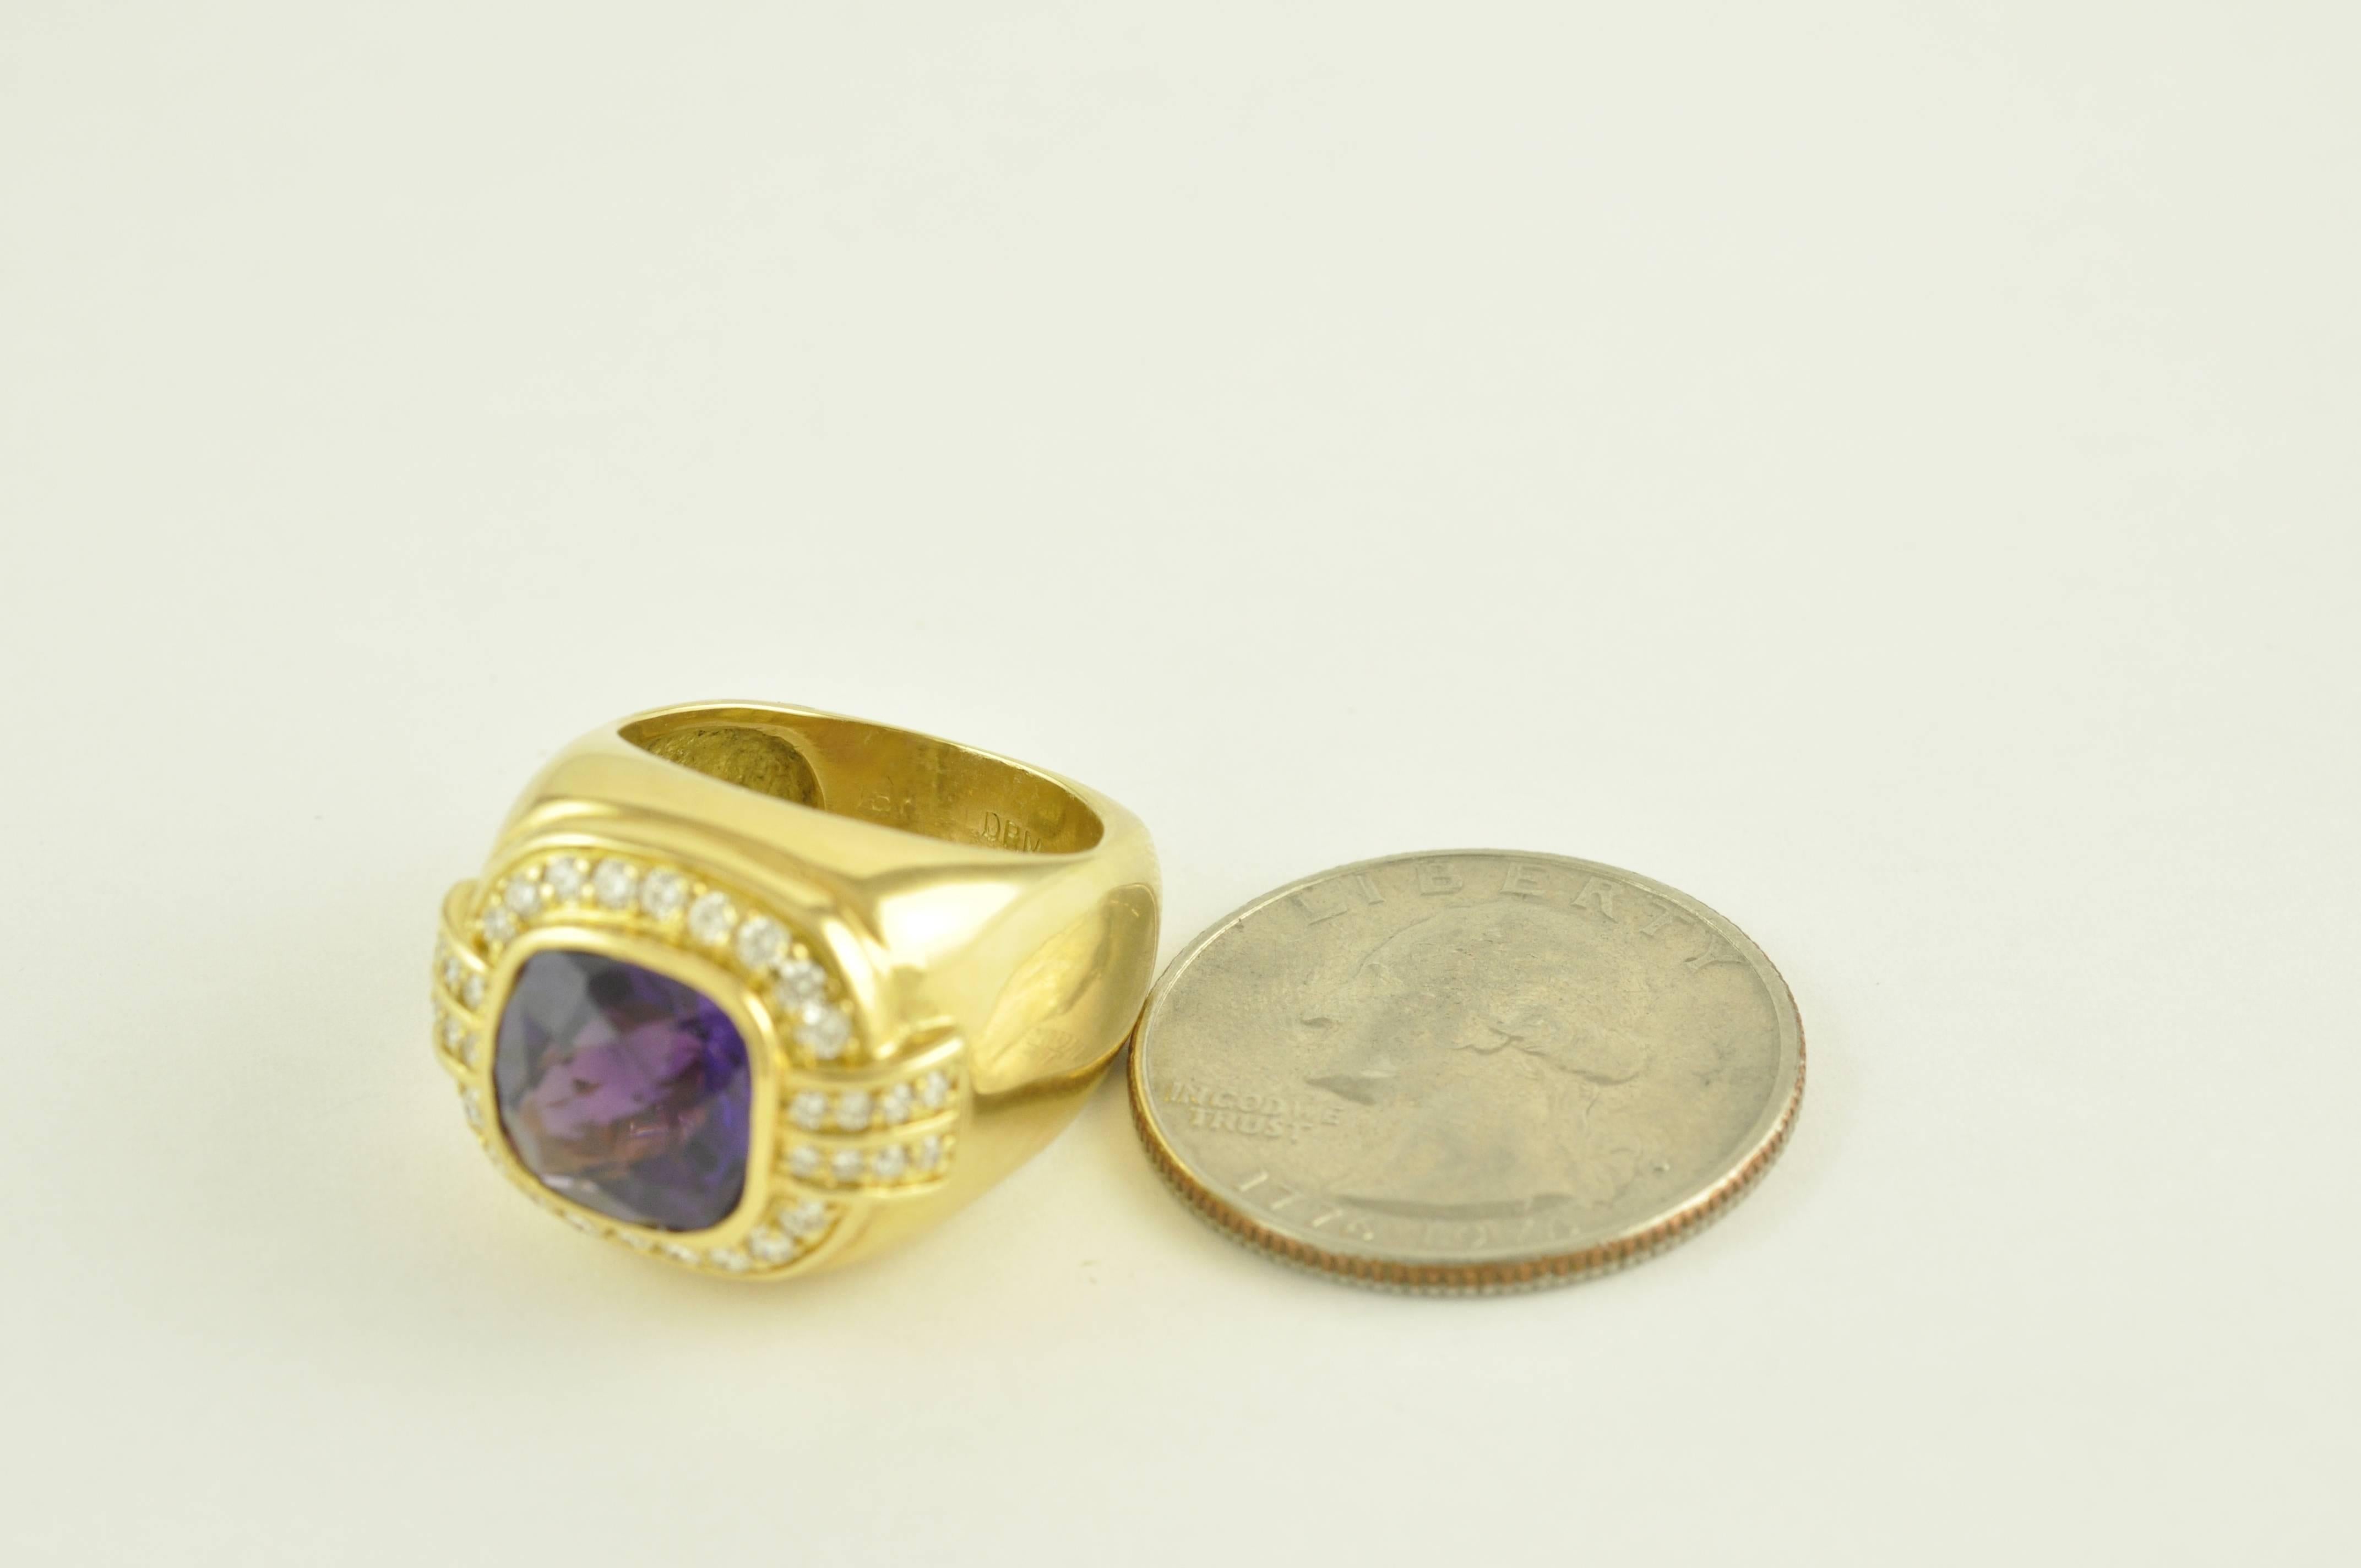 Cushion Cut Gold and Faceted Amethyst Ring with Diamonds